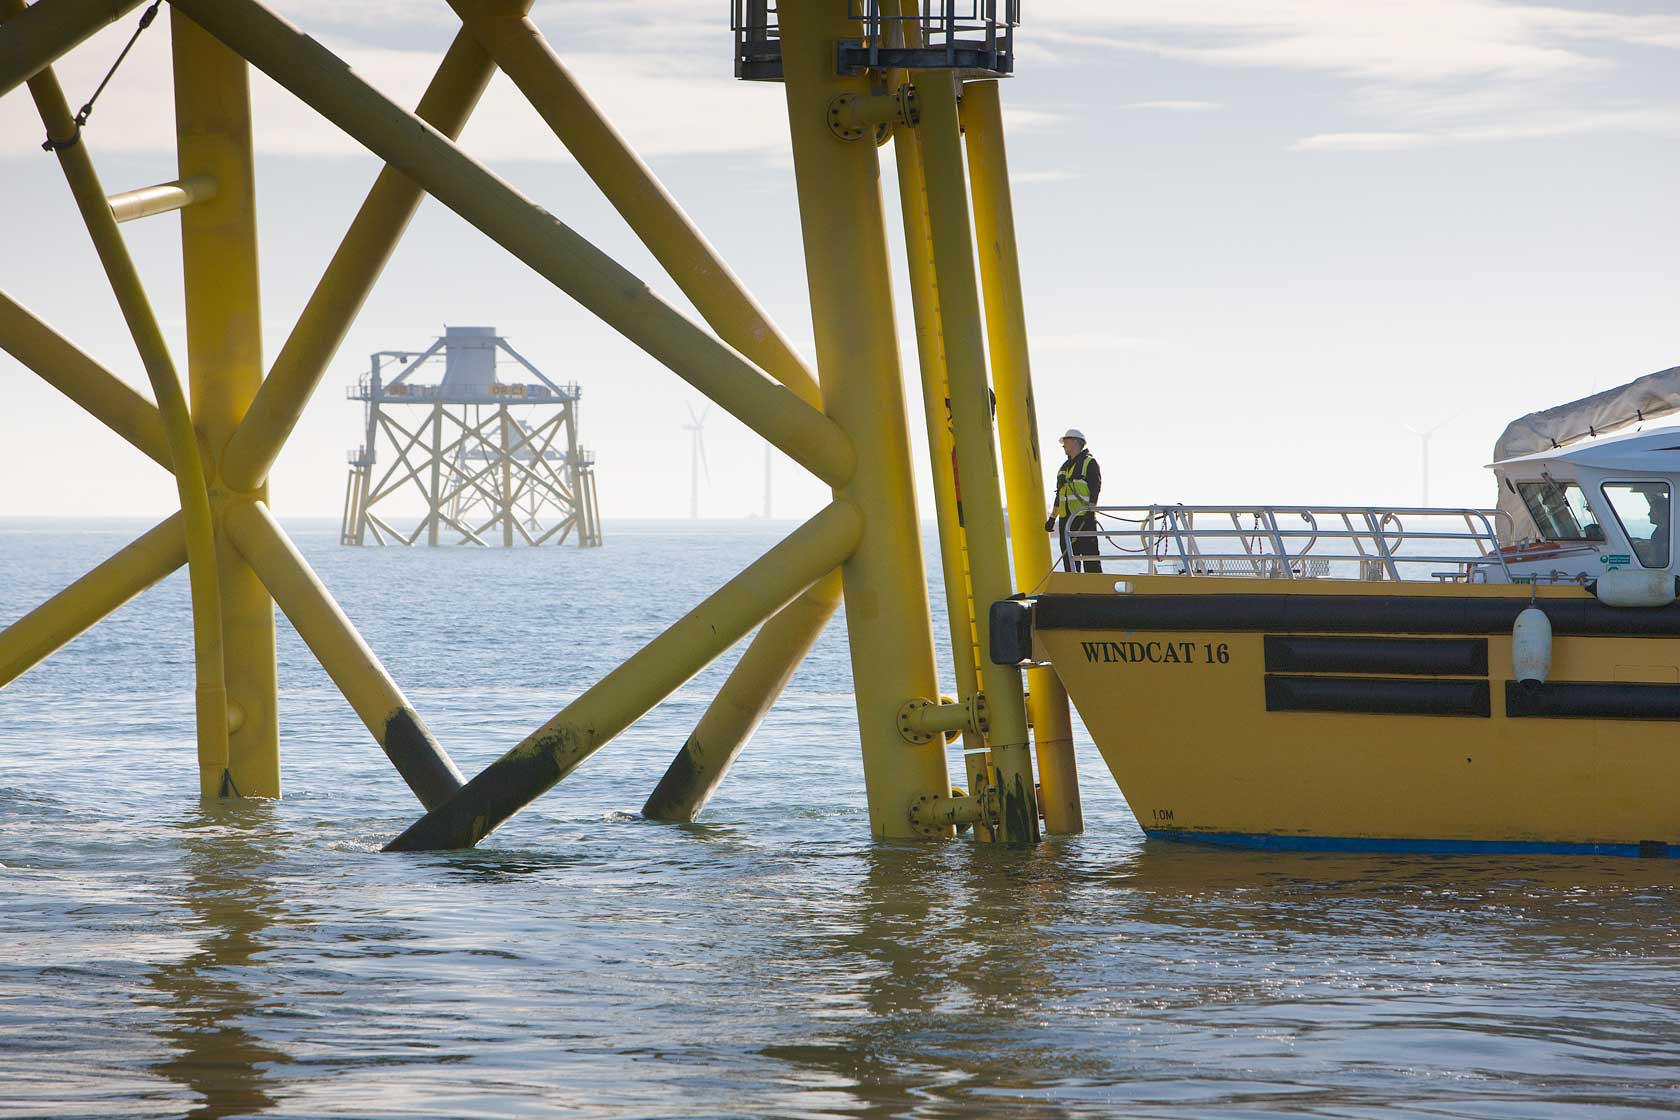 Construction of the Ormonde offshore wind farm. 